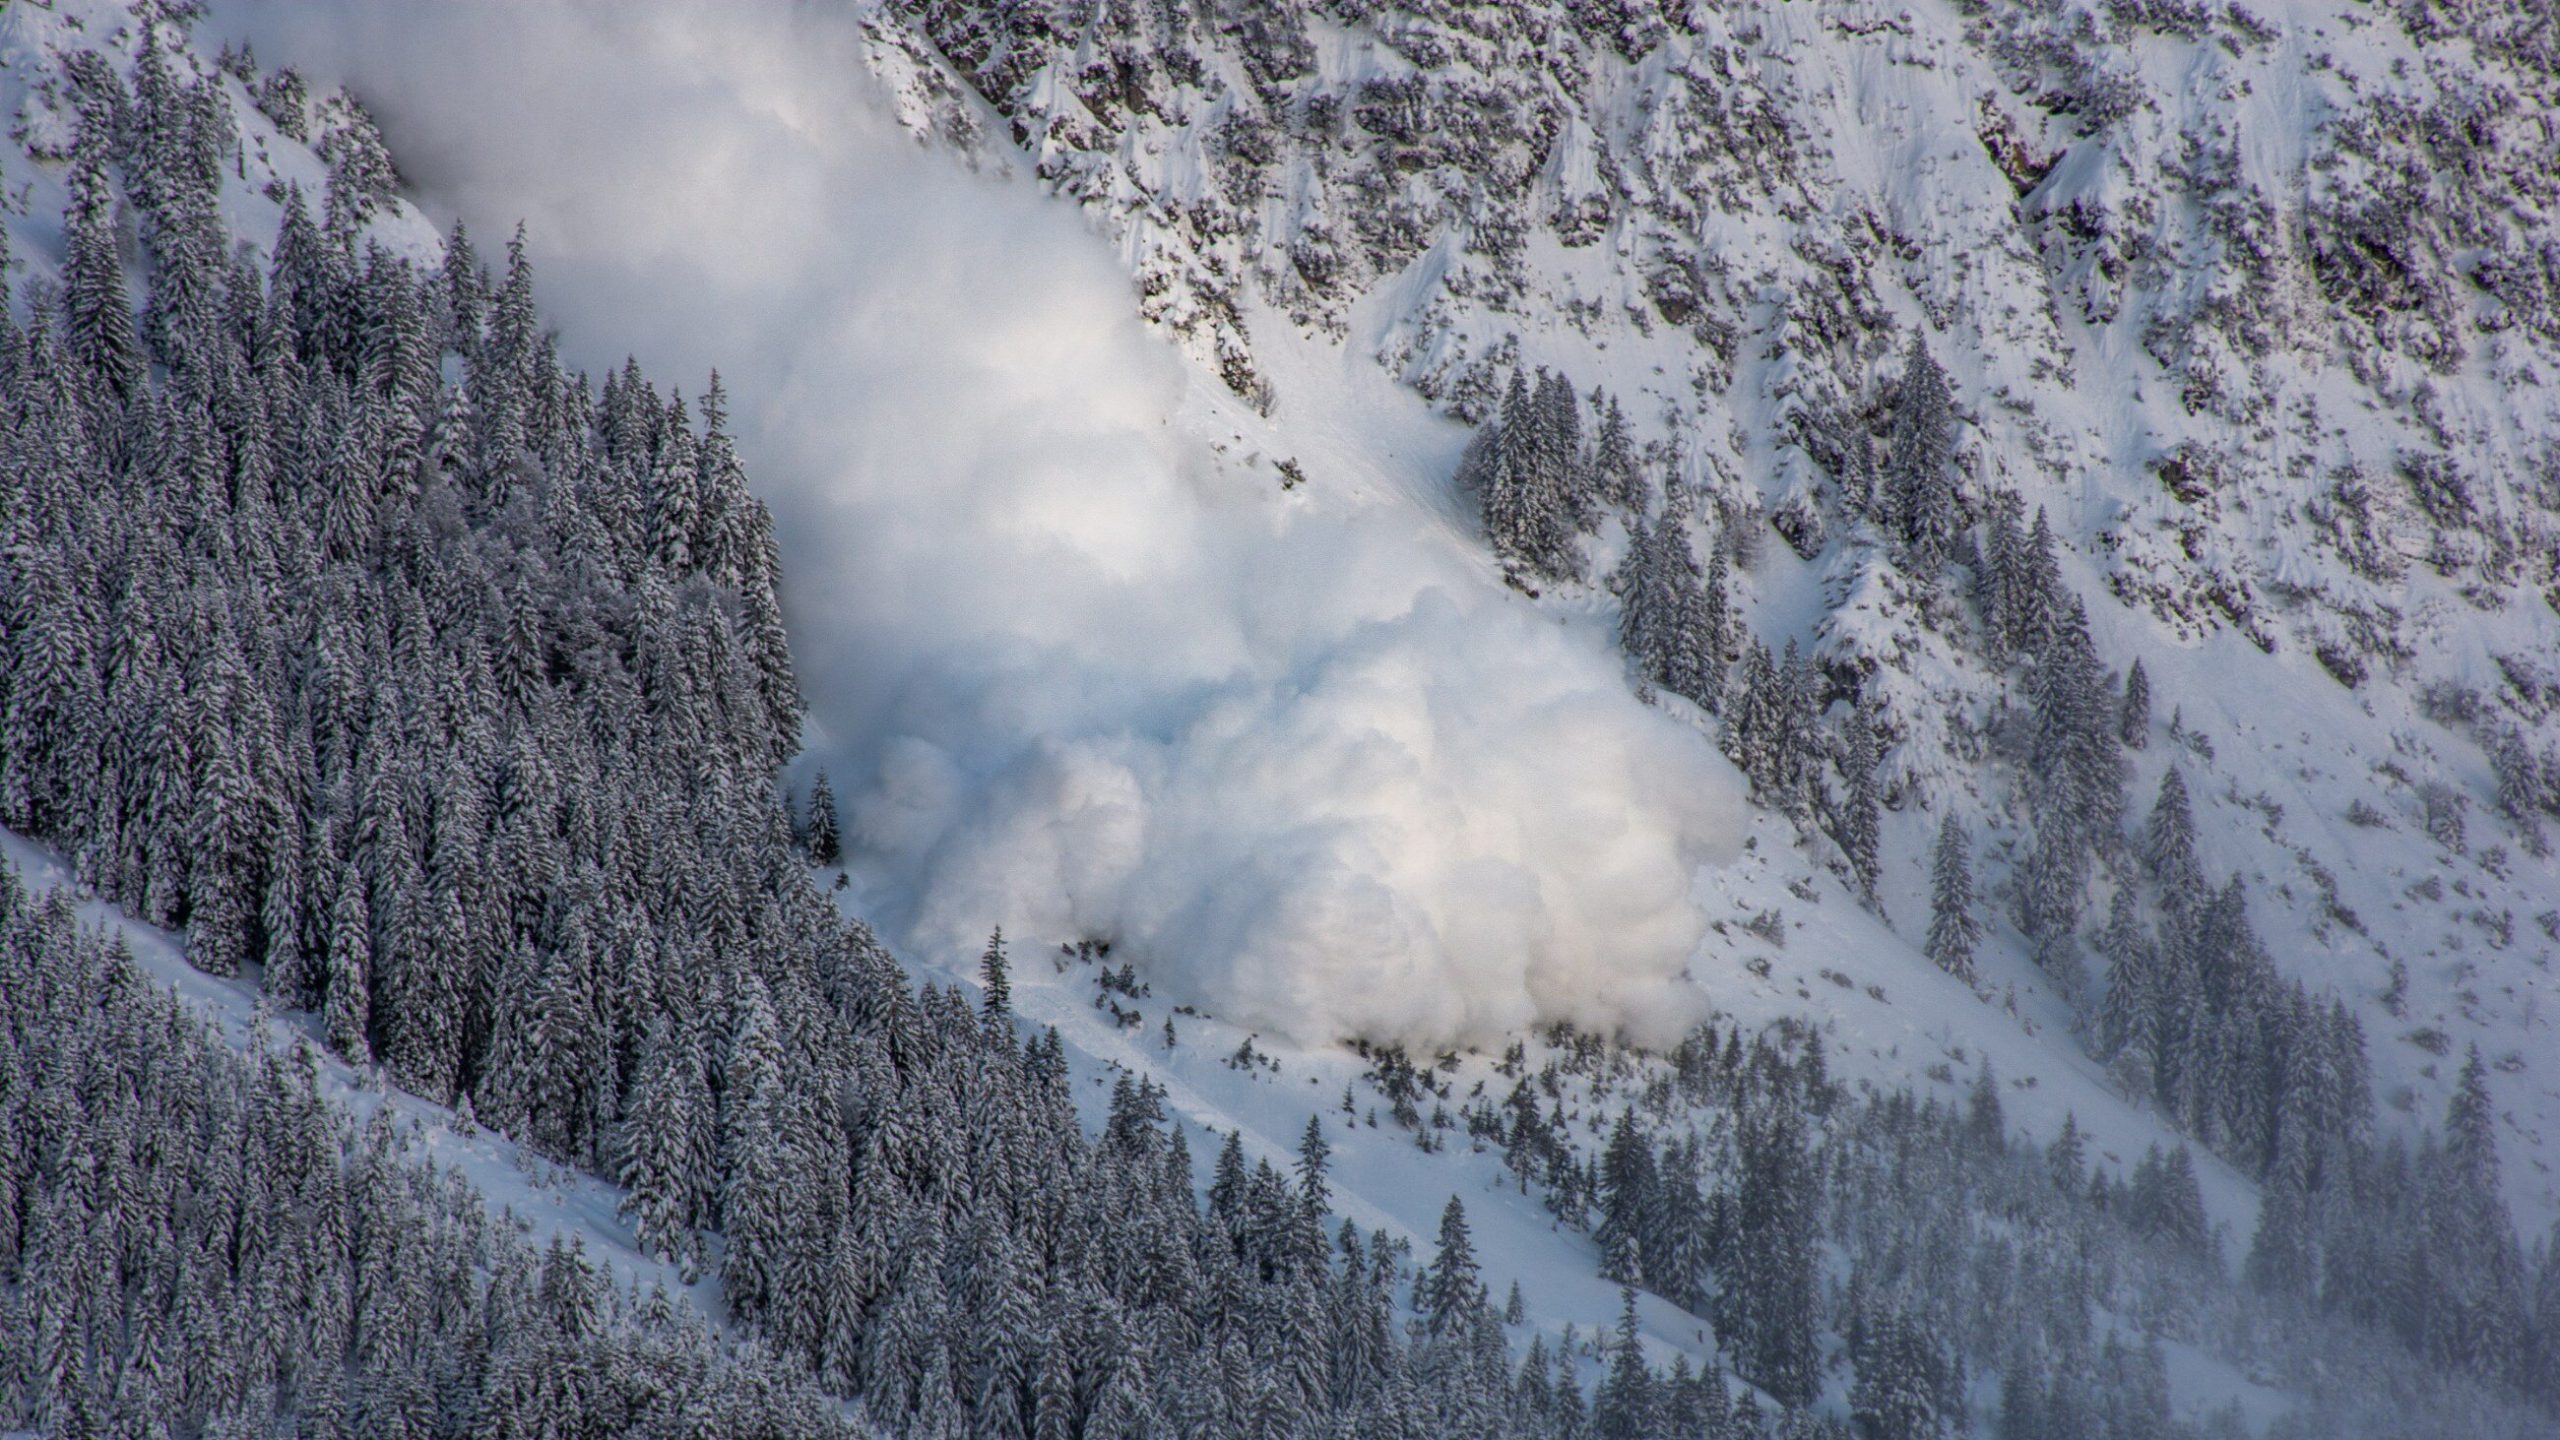 The avalanche cut off up to 1,000 people.  They can't get out because of several meters of snow